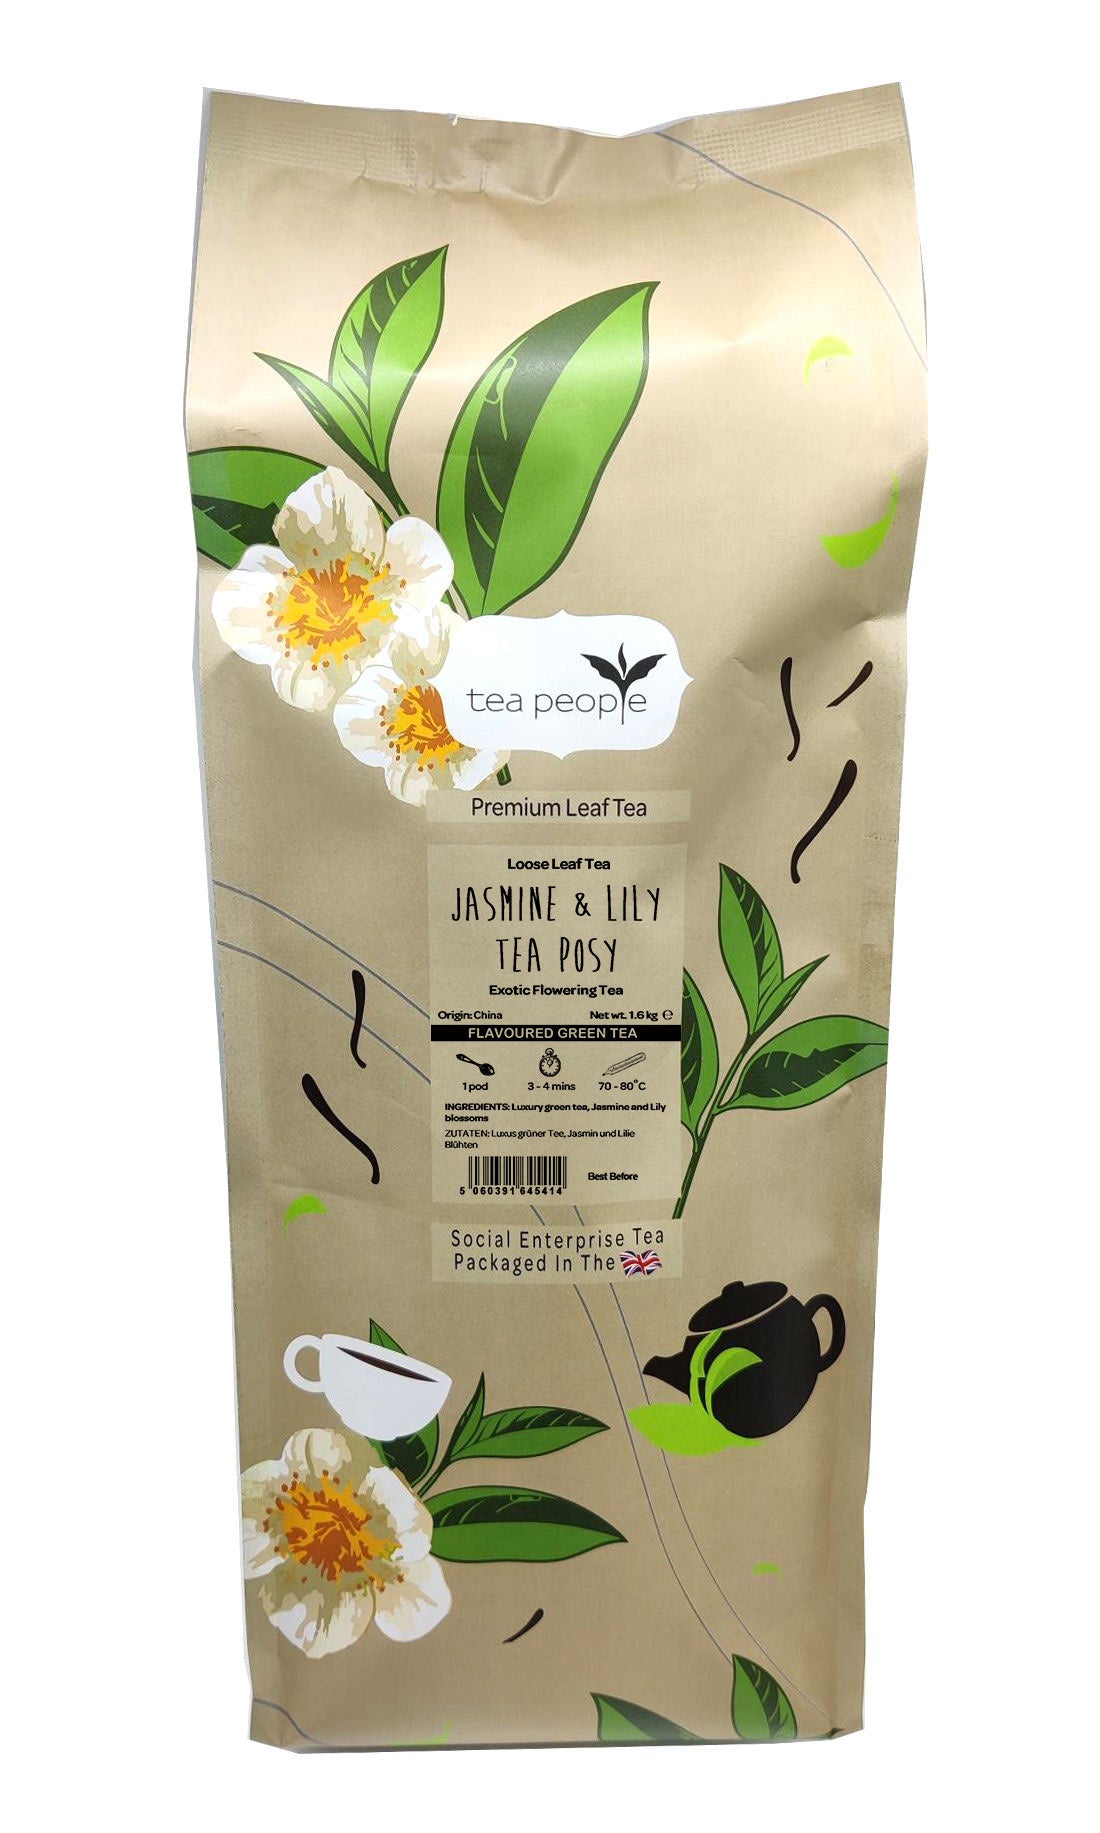 Jasmine And Lily Tea Posy- Flowering Tea - 1.6kg Large Catering Pack